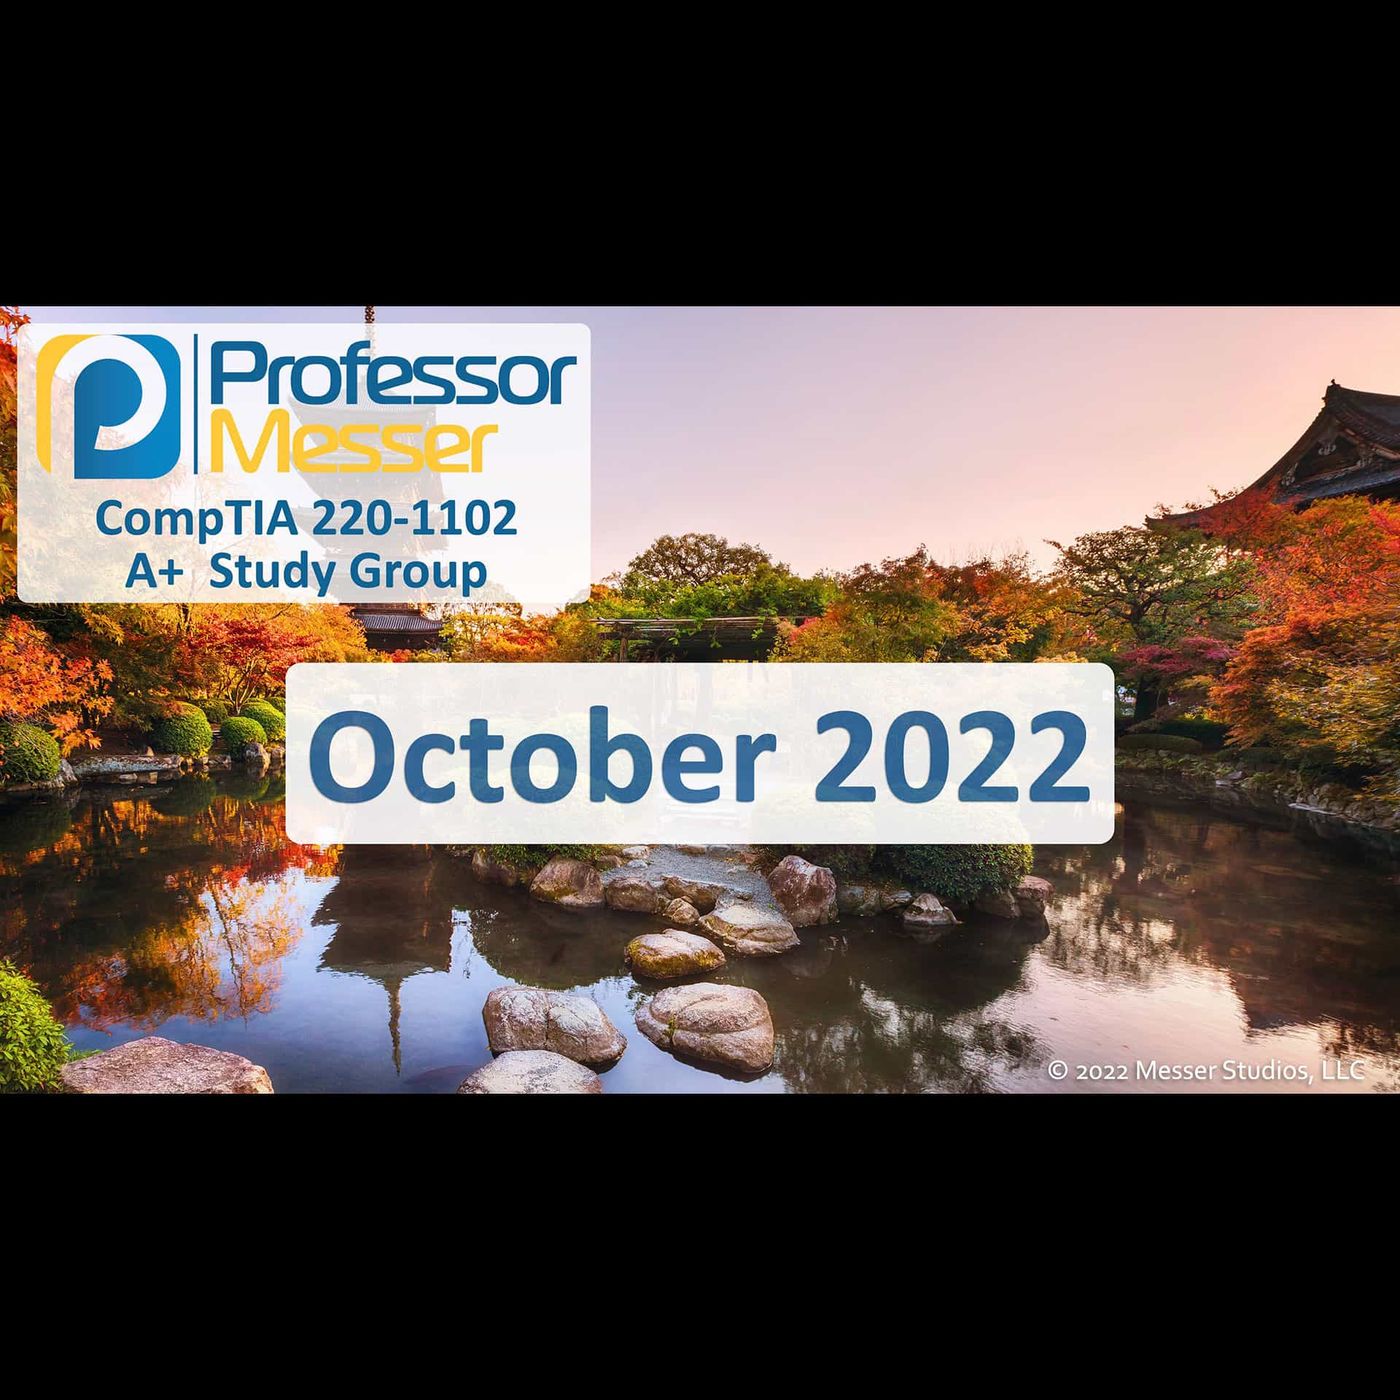 Professor Messer's CompTIA 220-1102 A+ Study Group After Show - October 2022